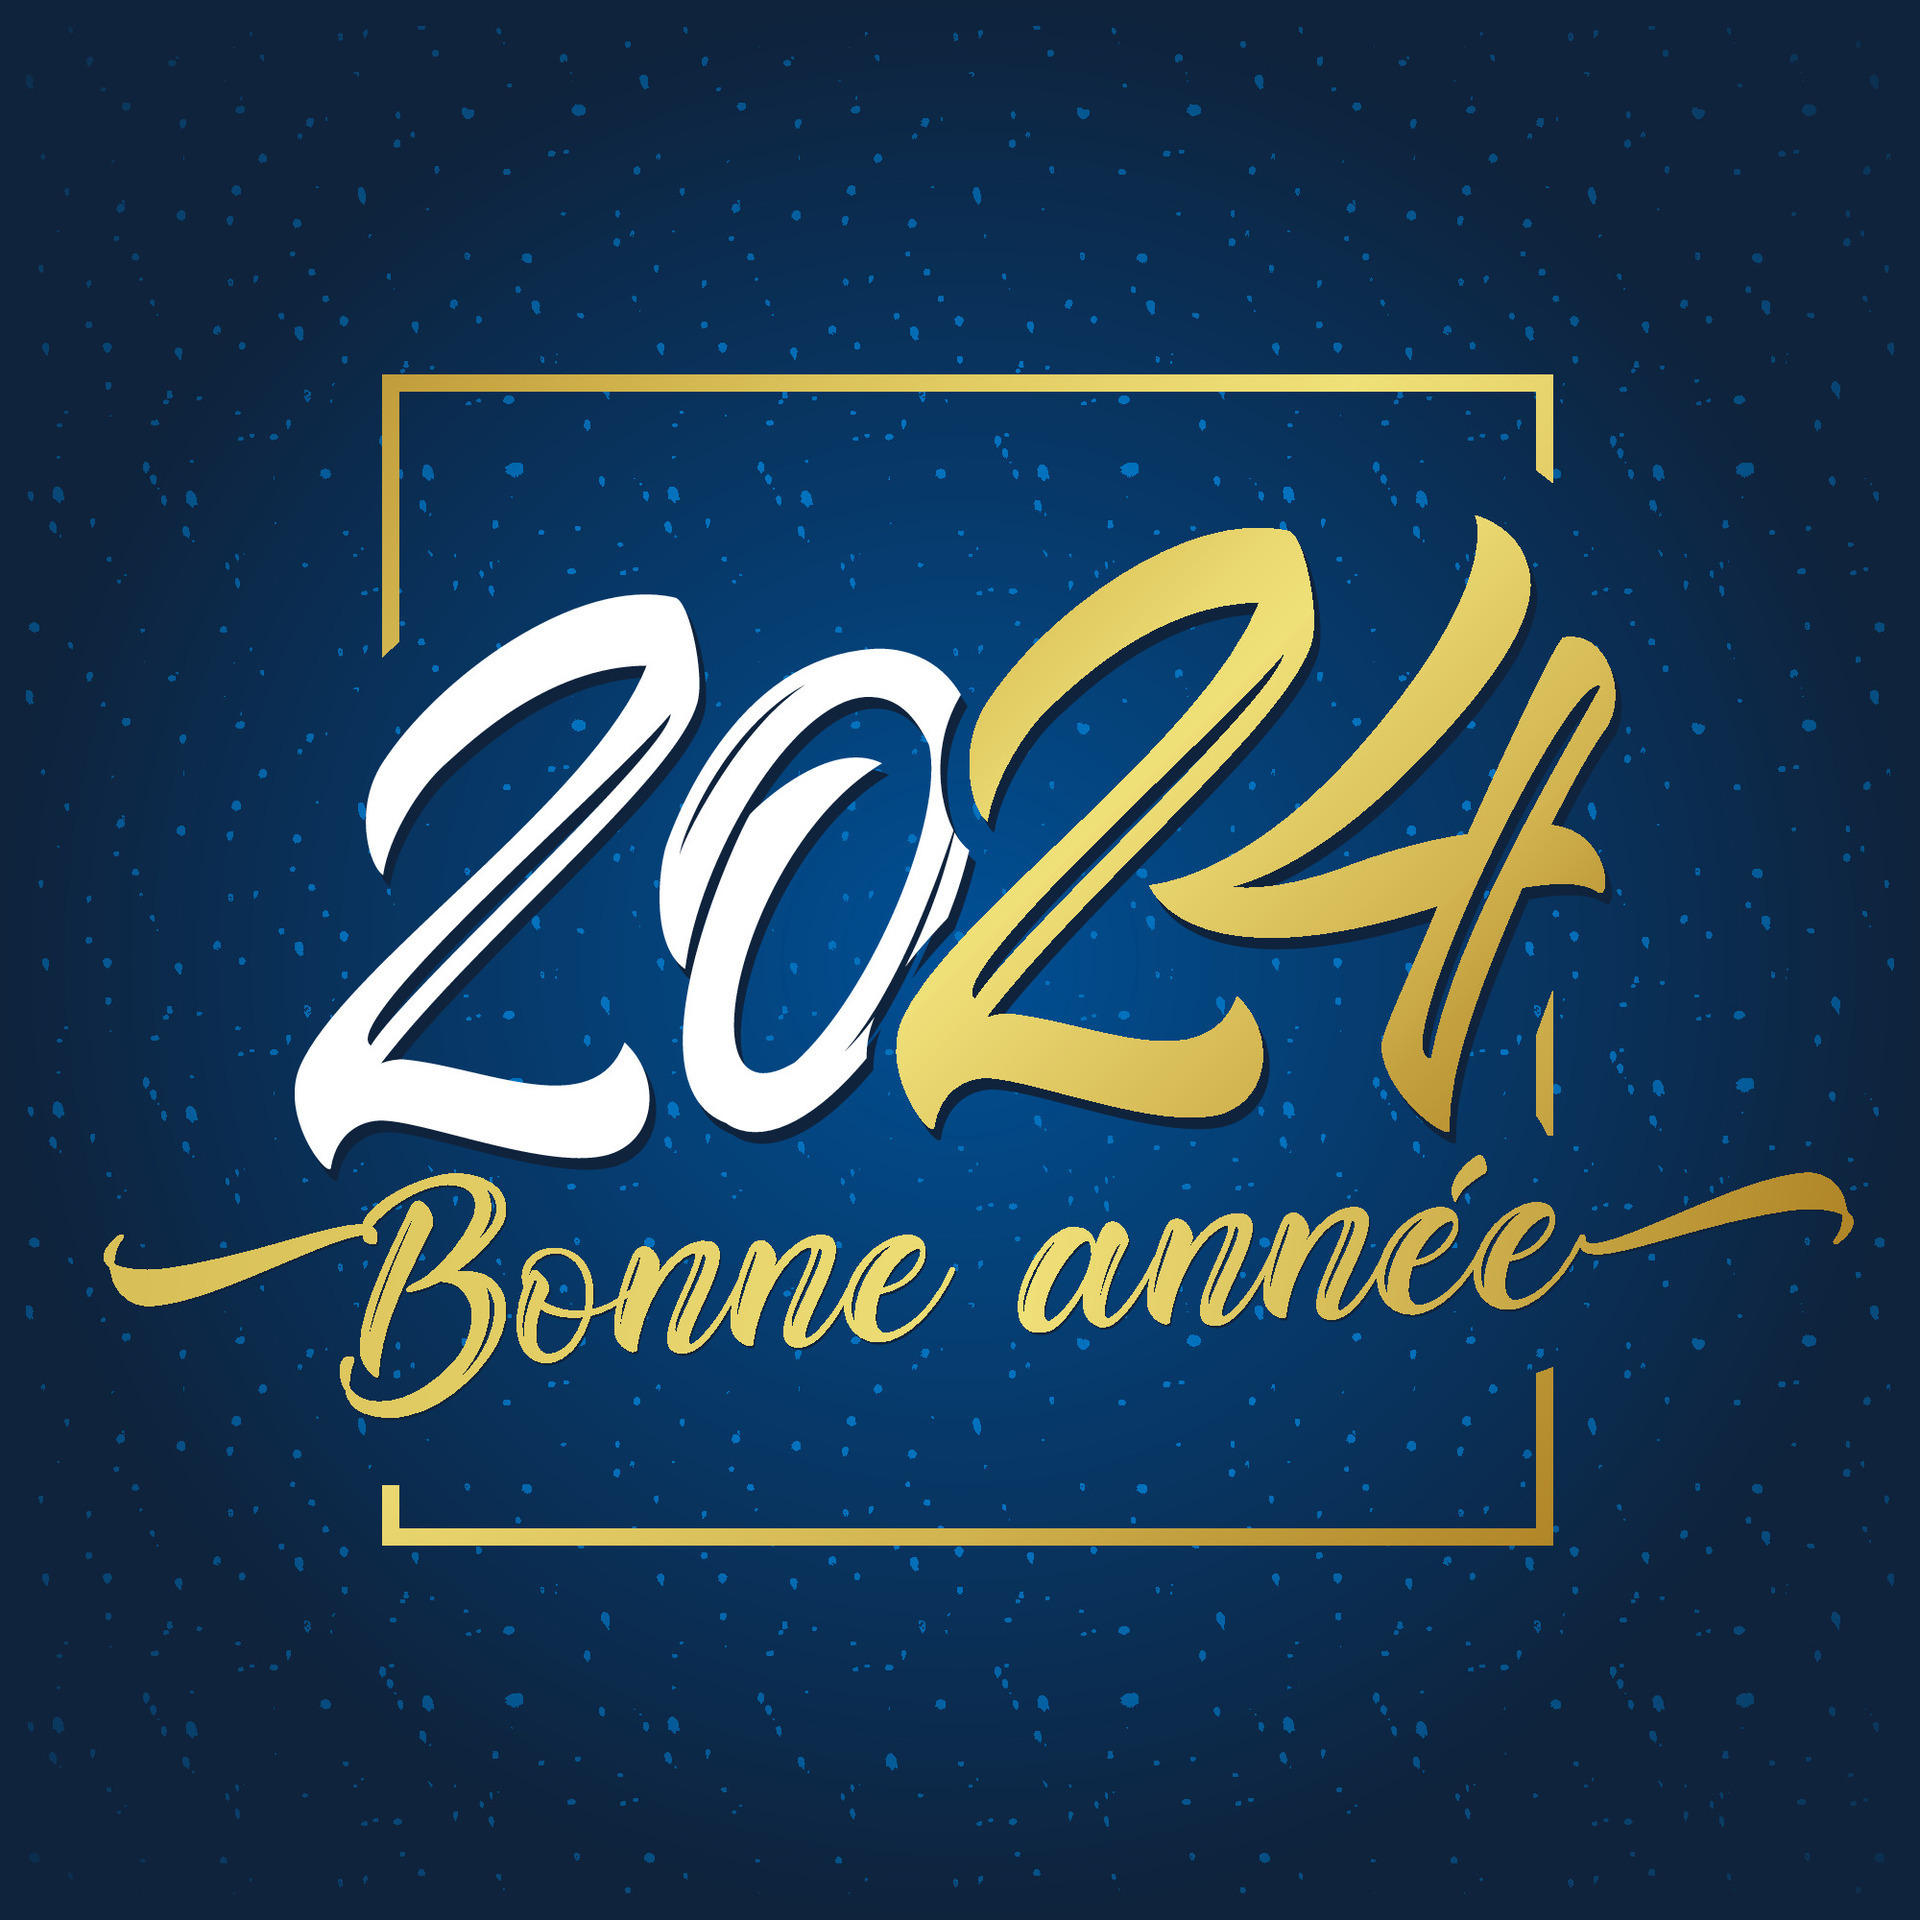 https://static.vecteezy.com/system/resources/previews/029/320/782/original/bonne-annee-2024-holiday-card-french-text-happy-new-year-illustration-banner-or-poster-vector.jpg